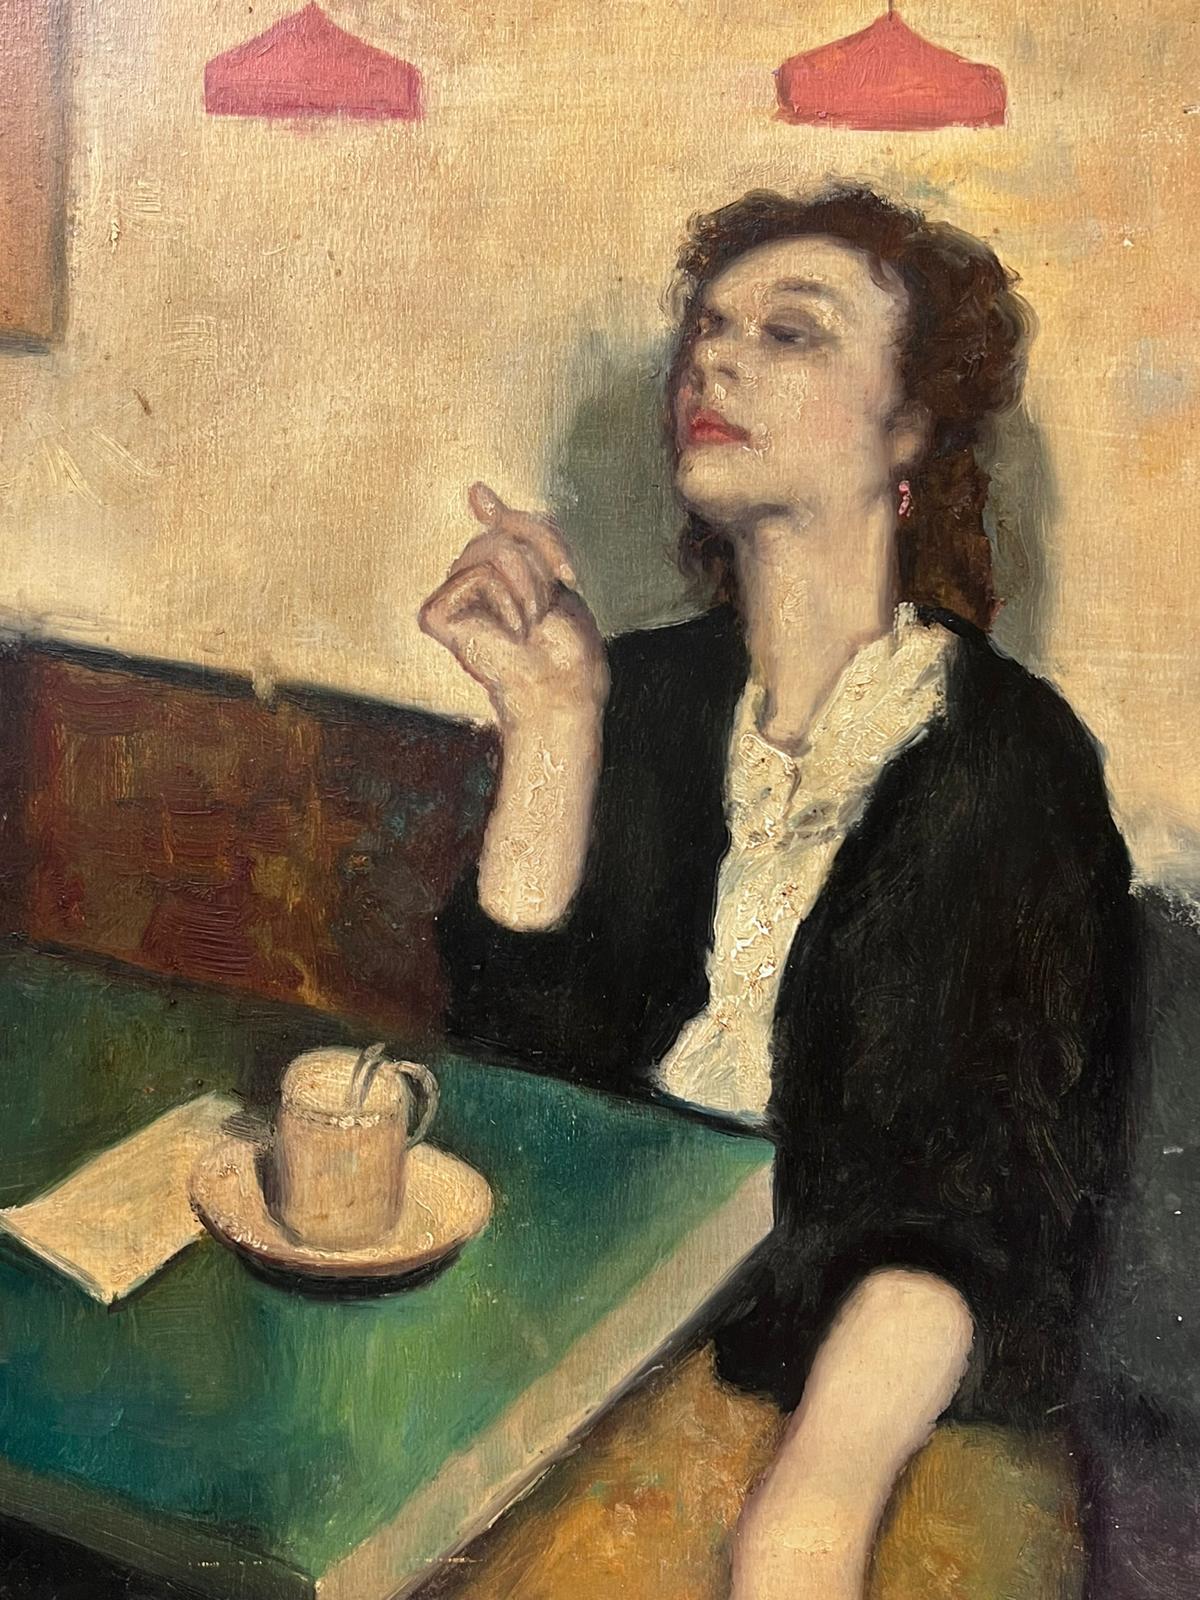 Woman in Cafe Interior
French school, mid 20th century
indistinctly signed oil on board, unframed
board: 20 x 16 inches
provenance: private collection, Paris
condition: very good and sound condition bar some surface scuffing as shown in photos. 